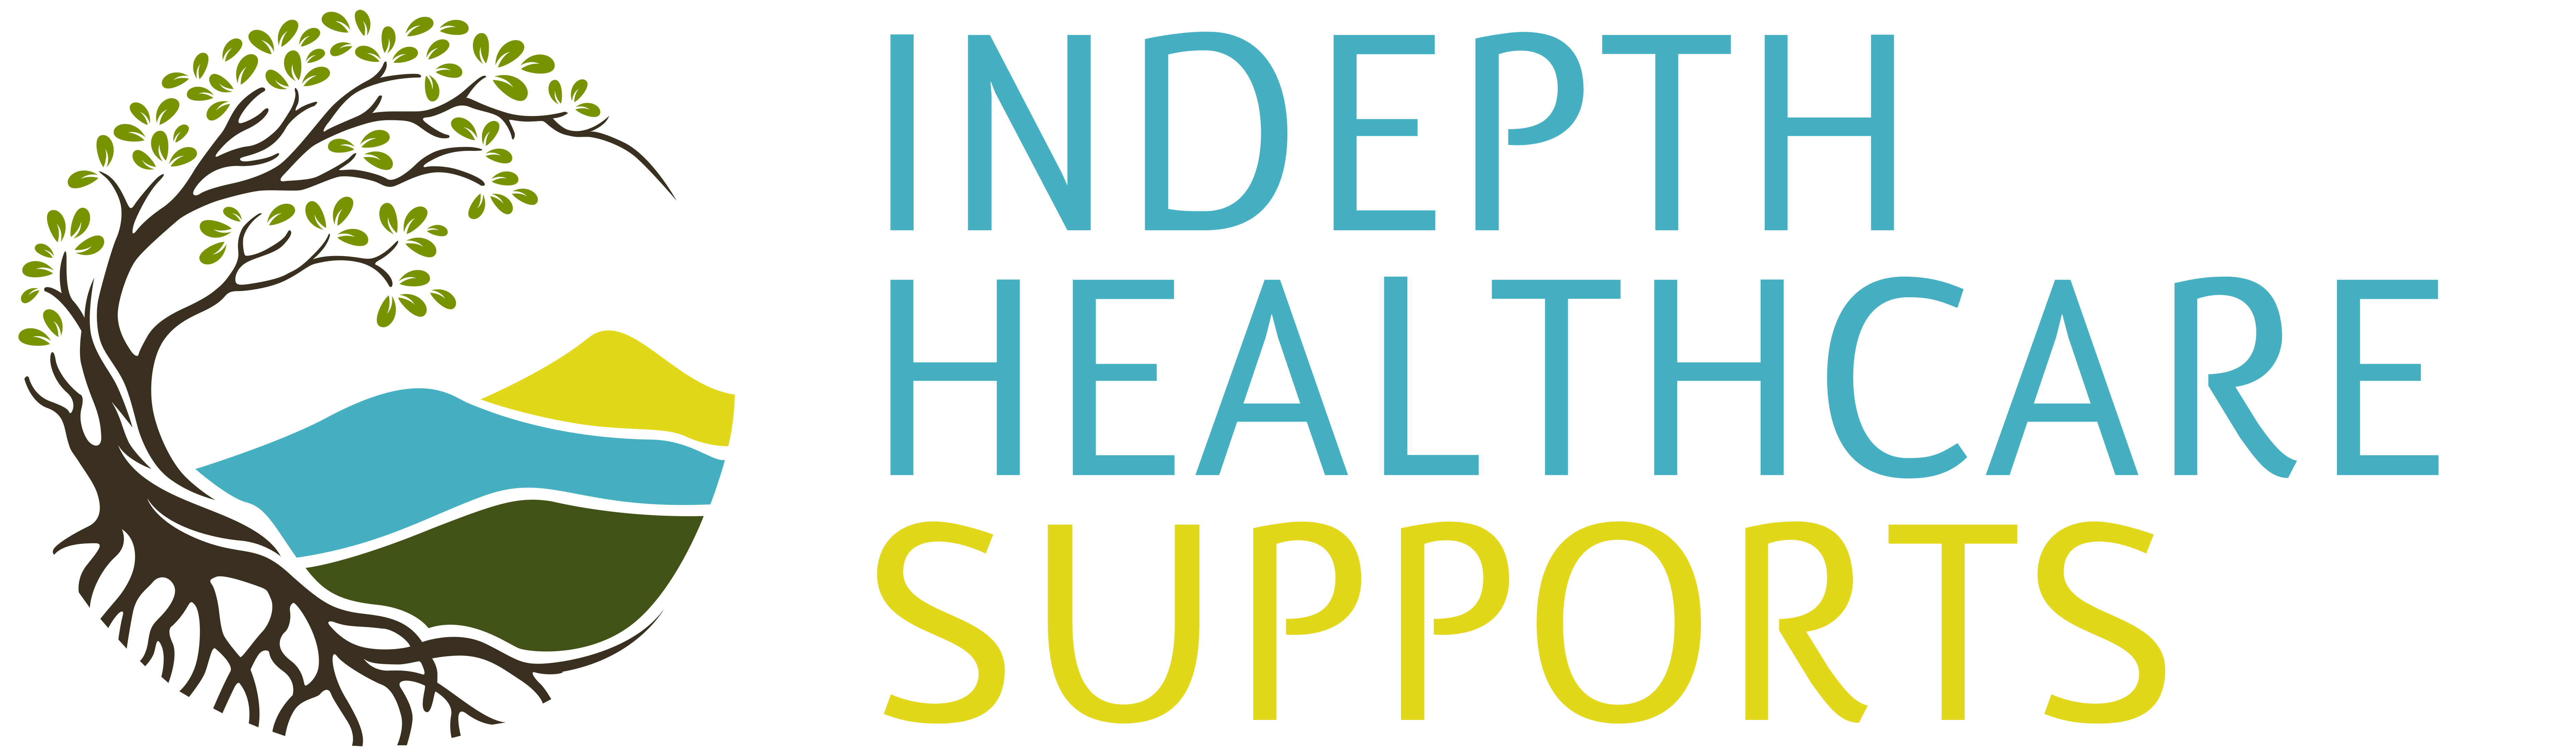 Indepth Healthcare Supports